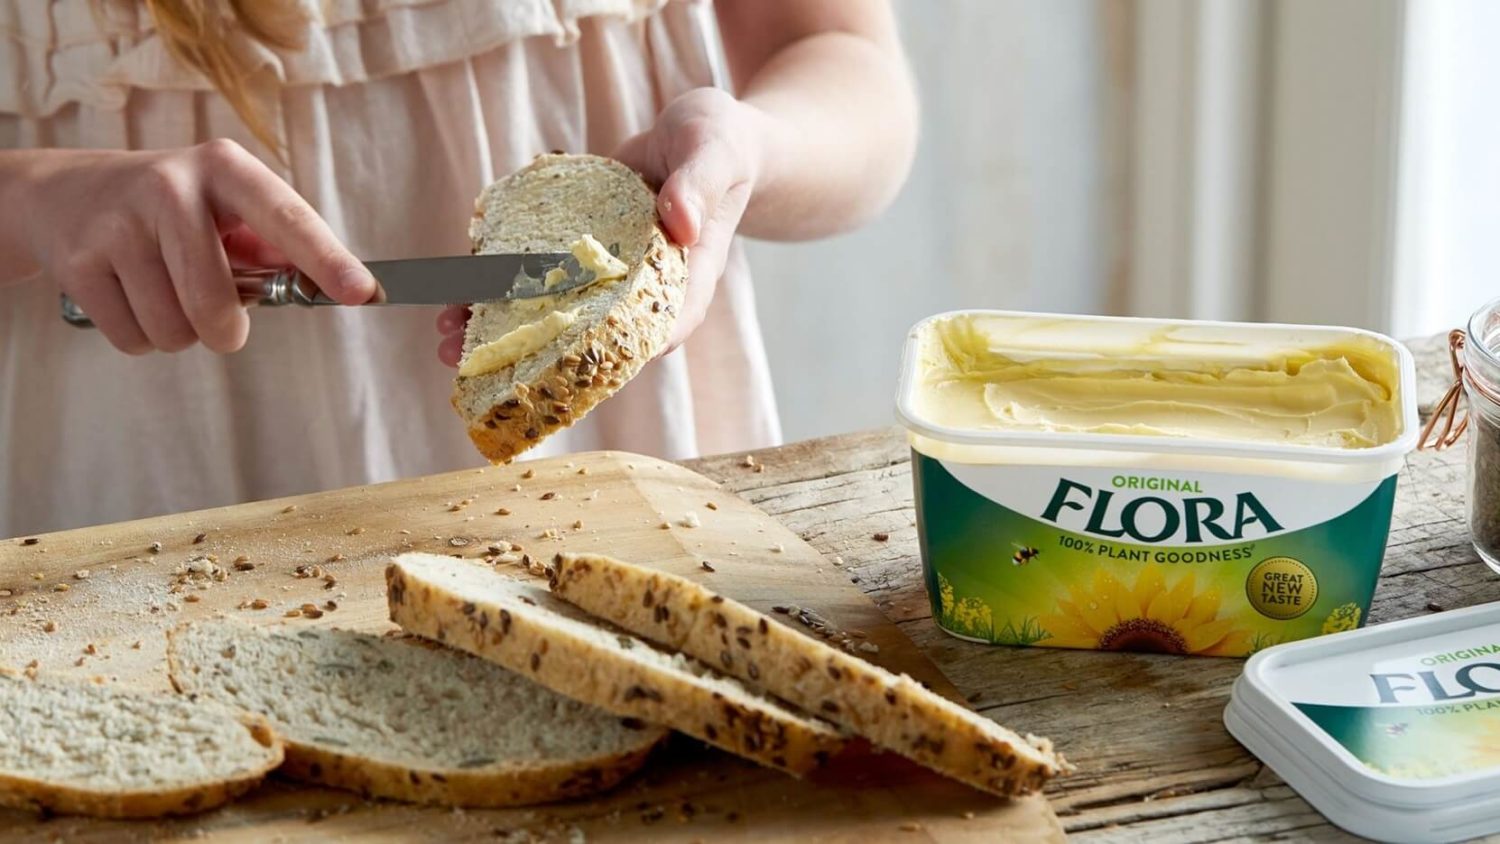 There Are 75% More GHG Emissions In Butter Than Vegan Spreads